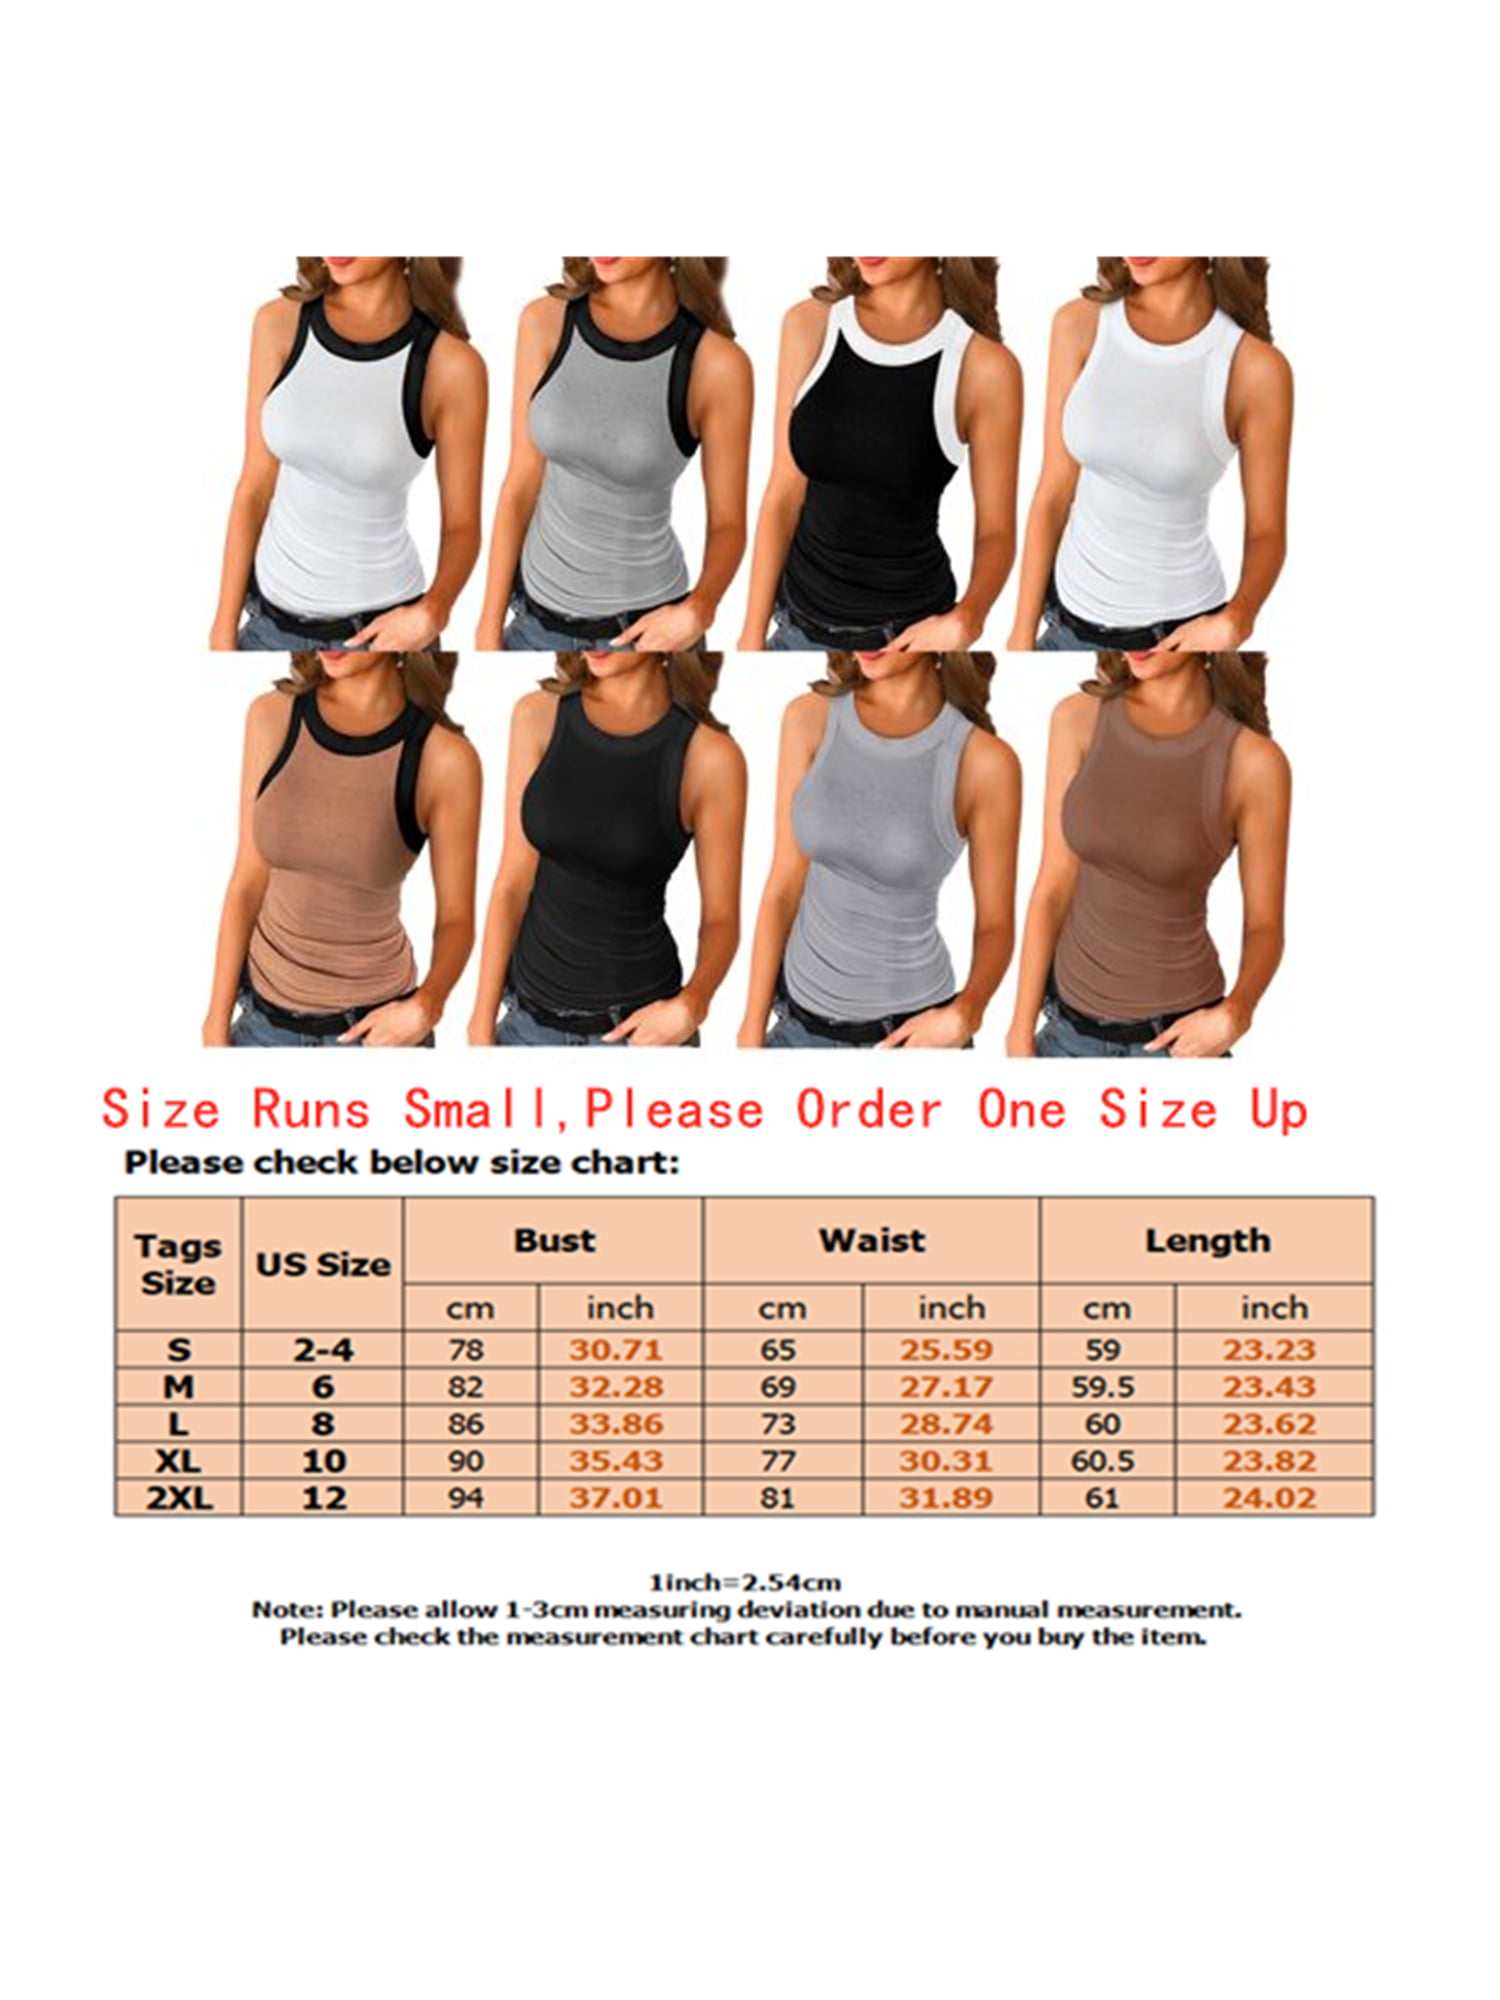 DYLH Women's Long Tank Top Basic Layering Workout Pack of 3 Top Yoga Tank  Sport T-Shirt Gym Fitness Running Sleeveless Vest